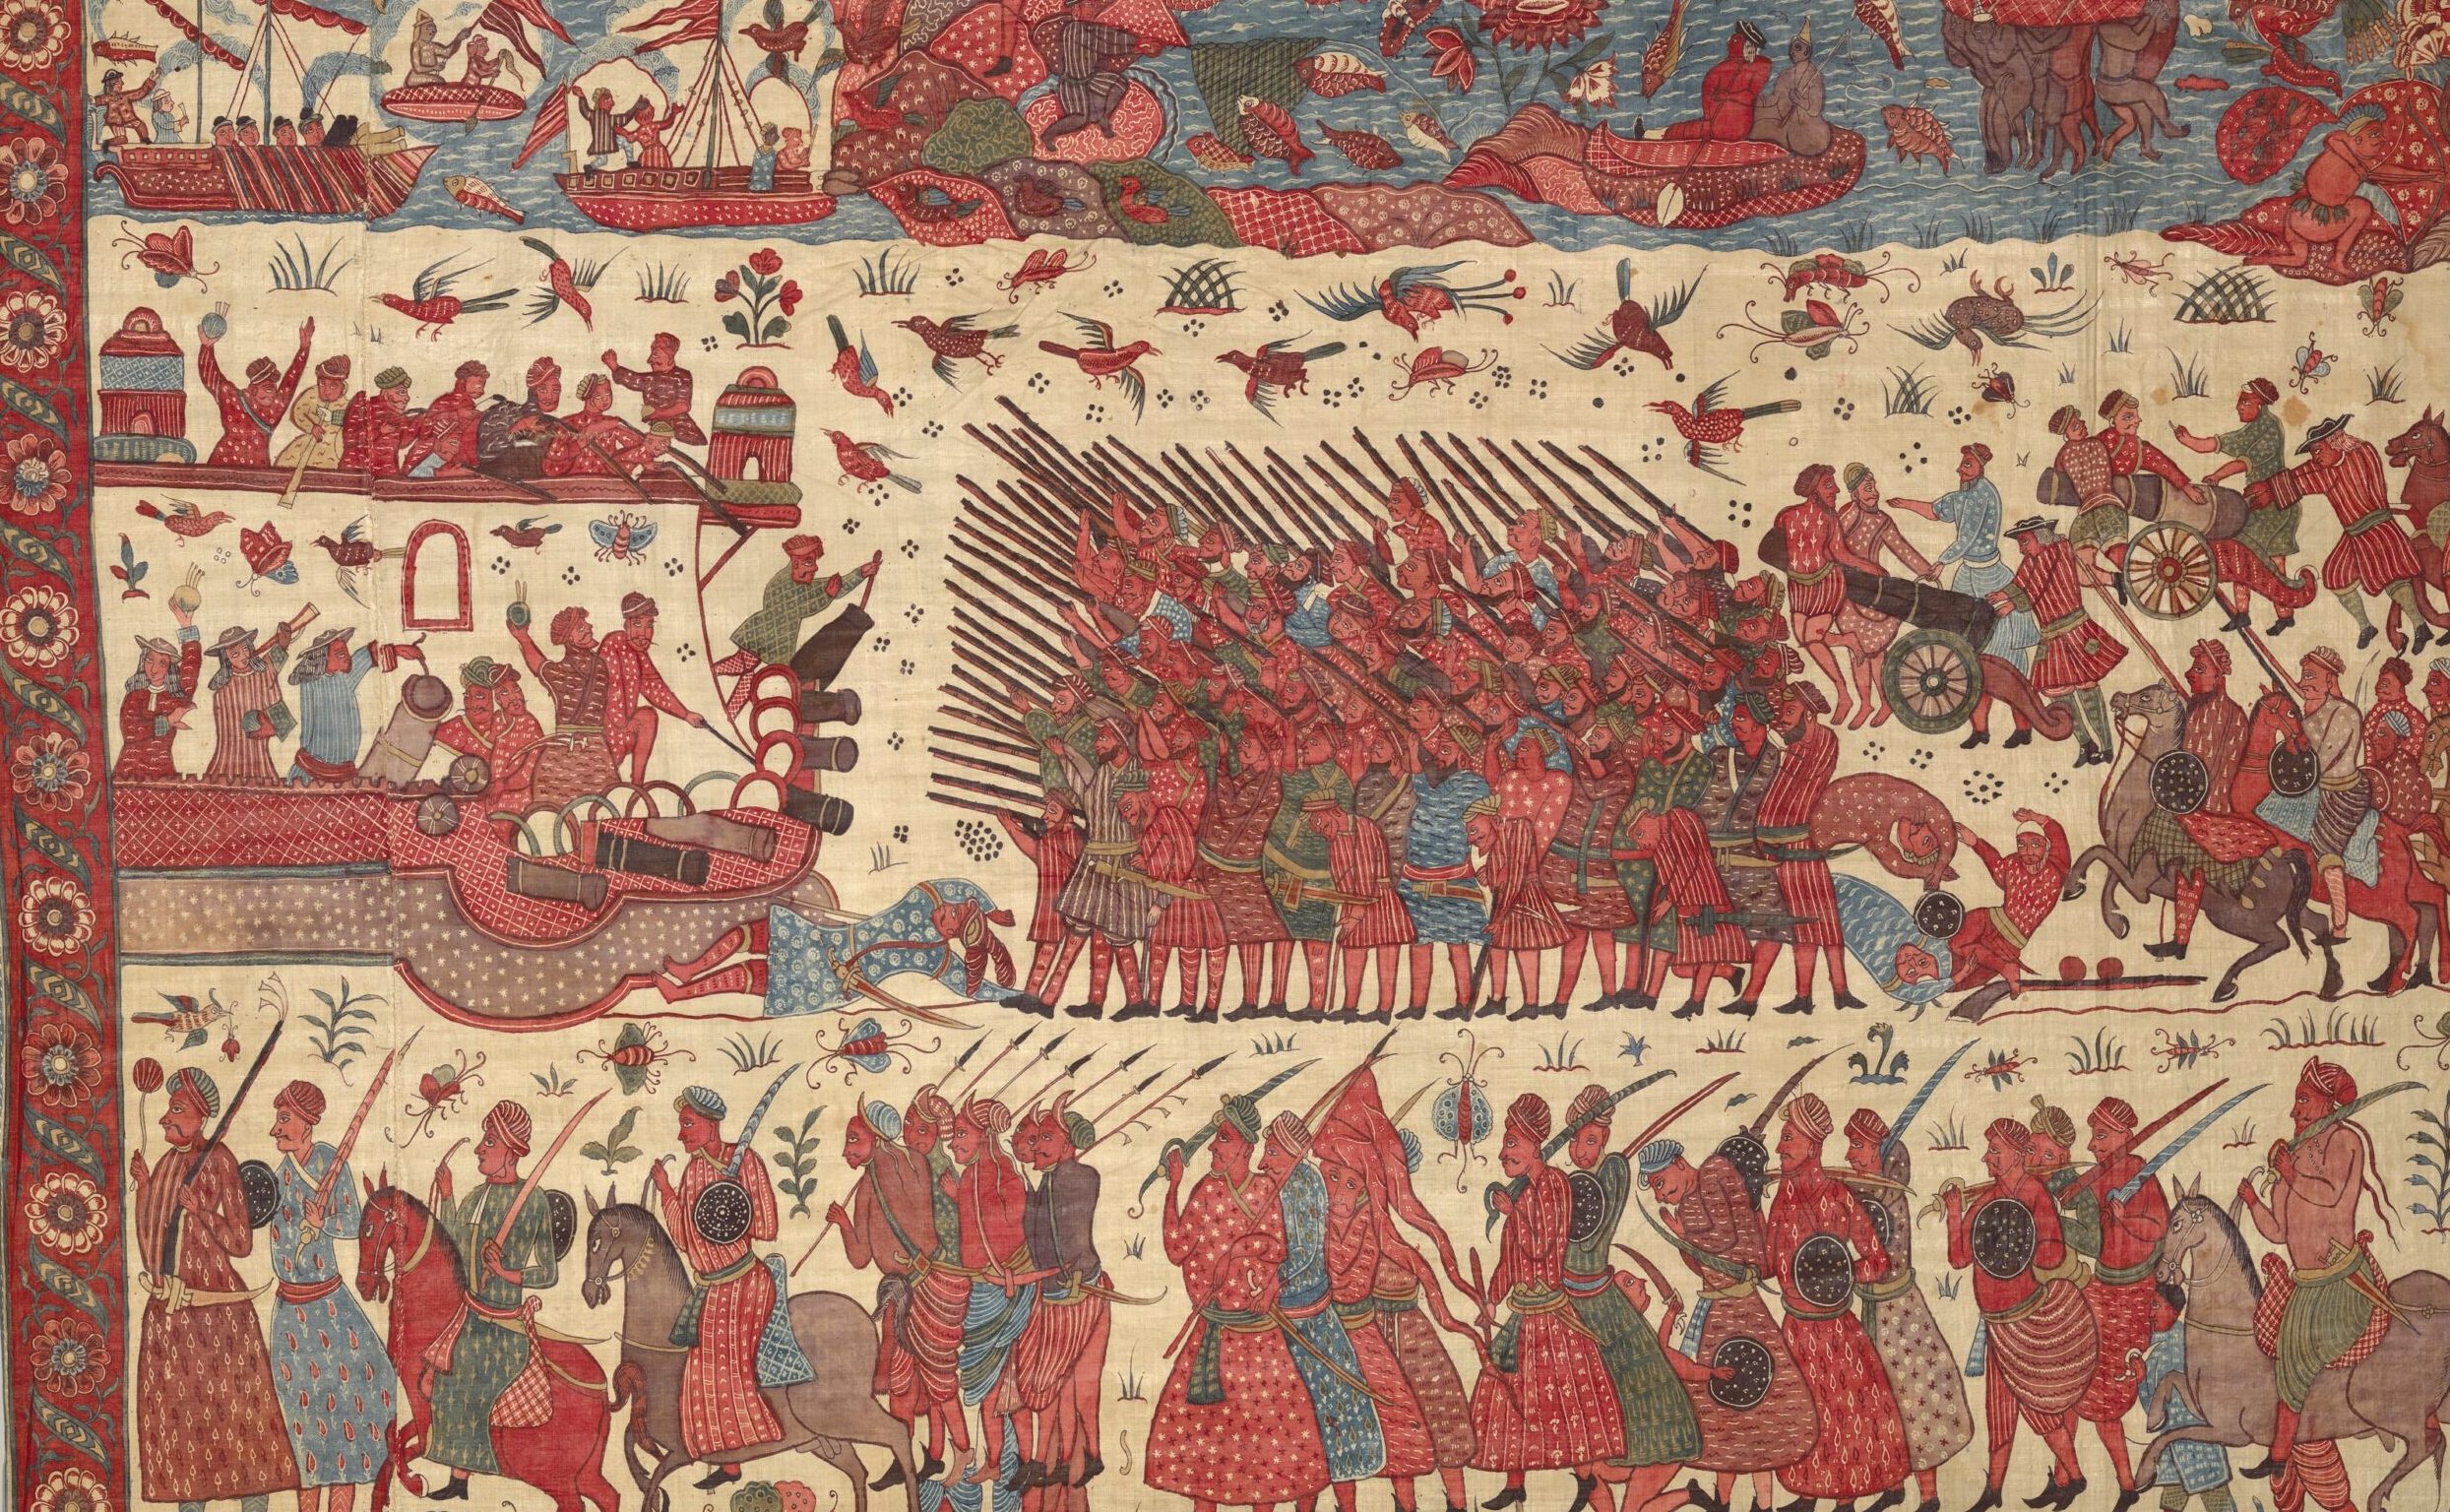 From Deepthi Murali’s “Visualizing the Interwoven World of Eighteenth-Century South Indian Textiles” digital scholarship project.